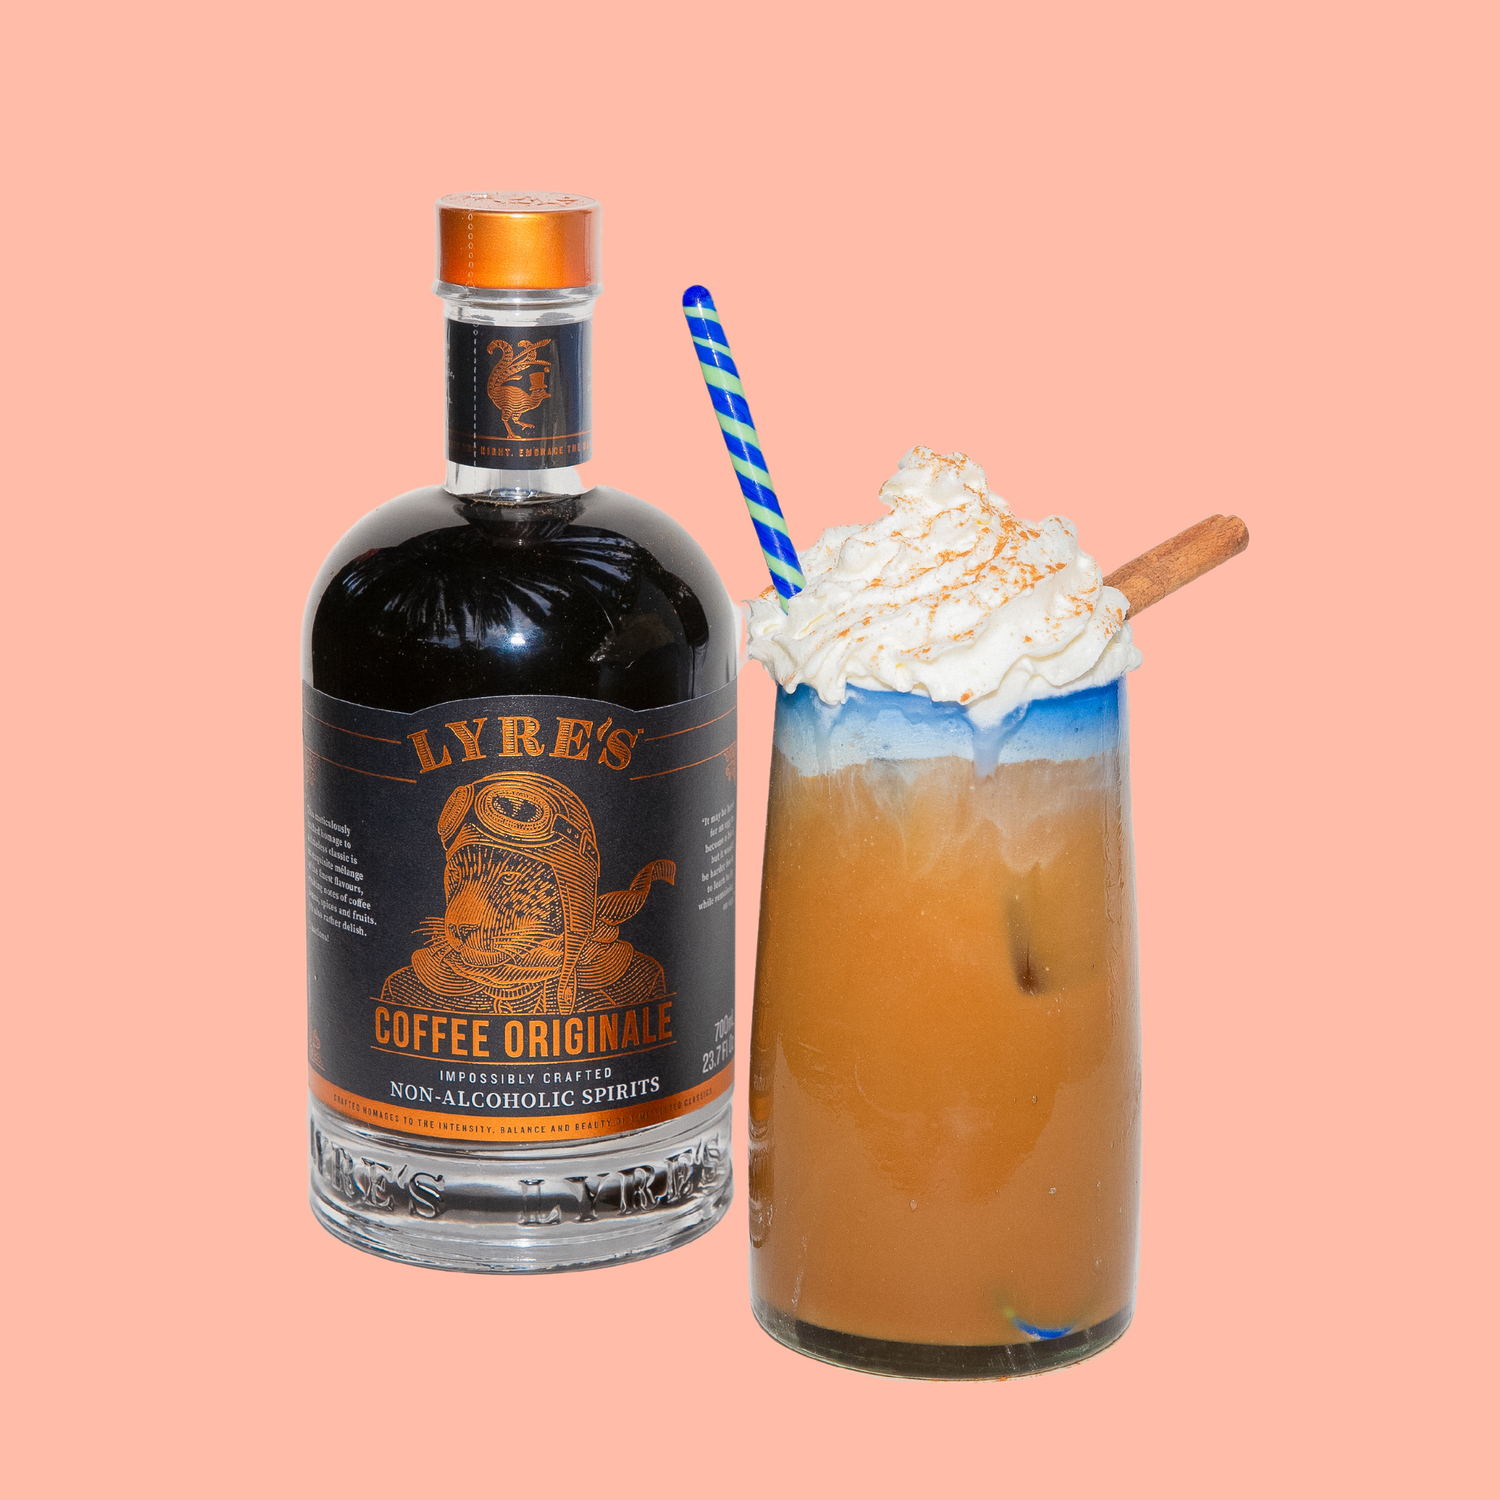 Iced Mexican Coffee with Ritual Zero Proof Nonalcoholic Tequila and Lyre's Coffee Originale